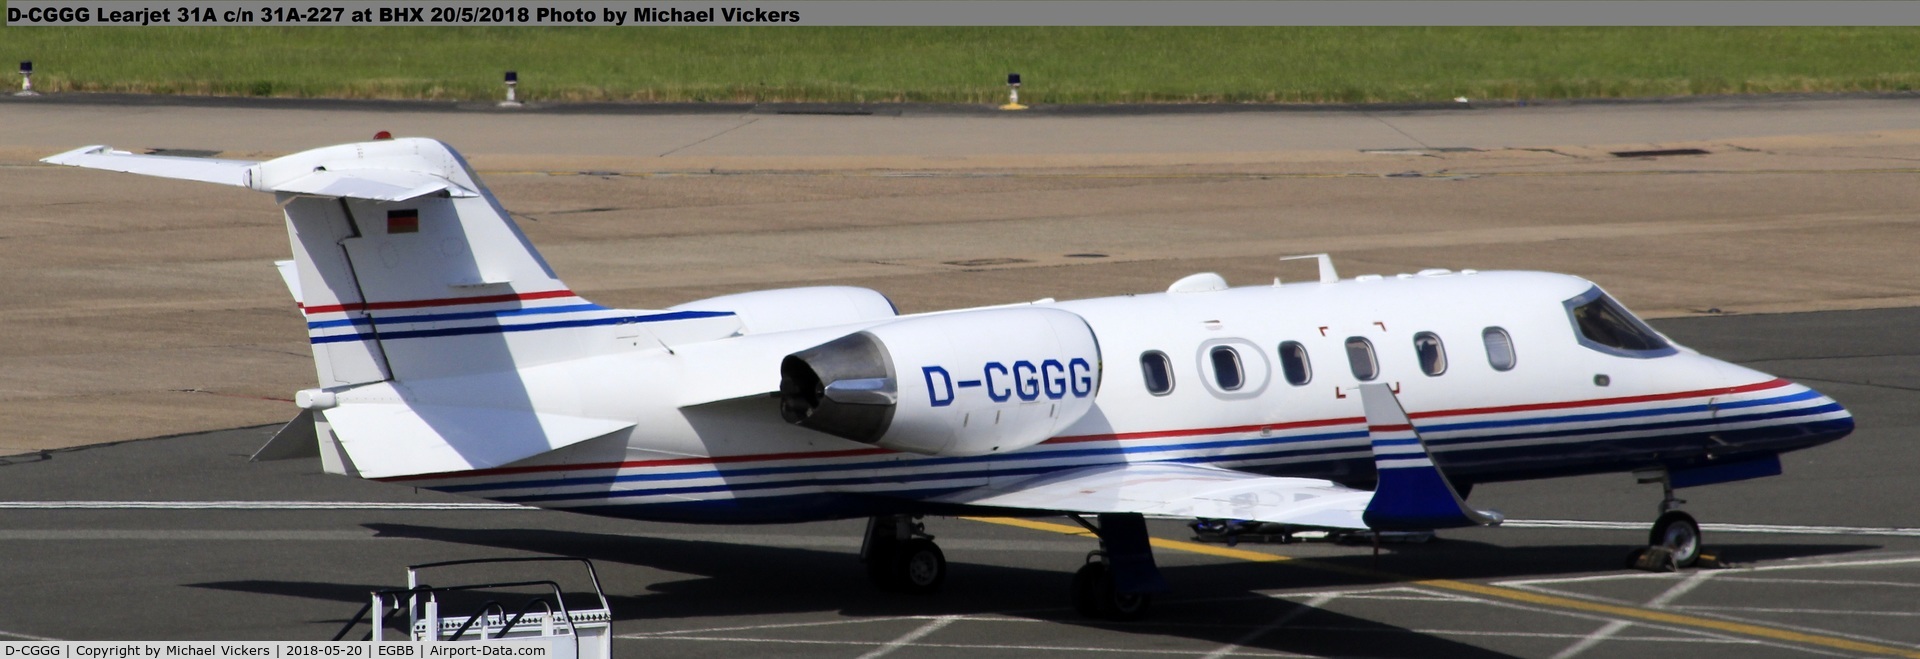 D-CGGG, 2001 Learjet 31A C/N 31A-227, Parked on the apron